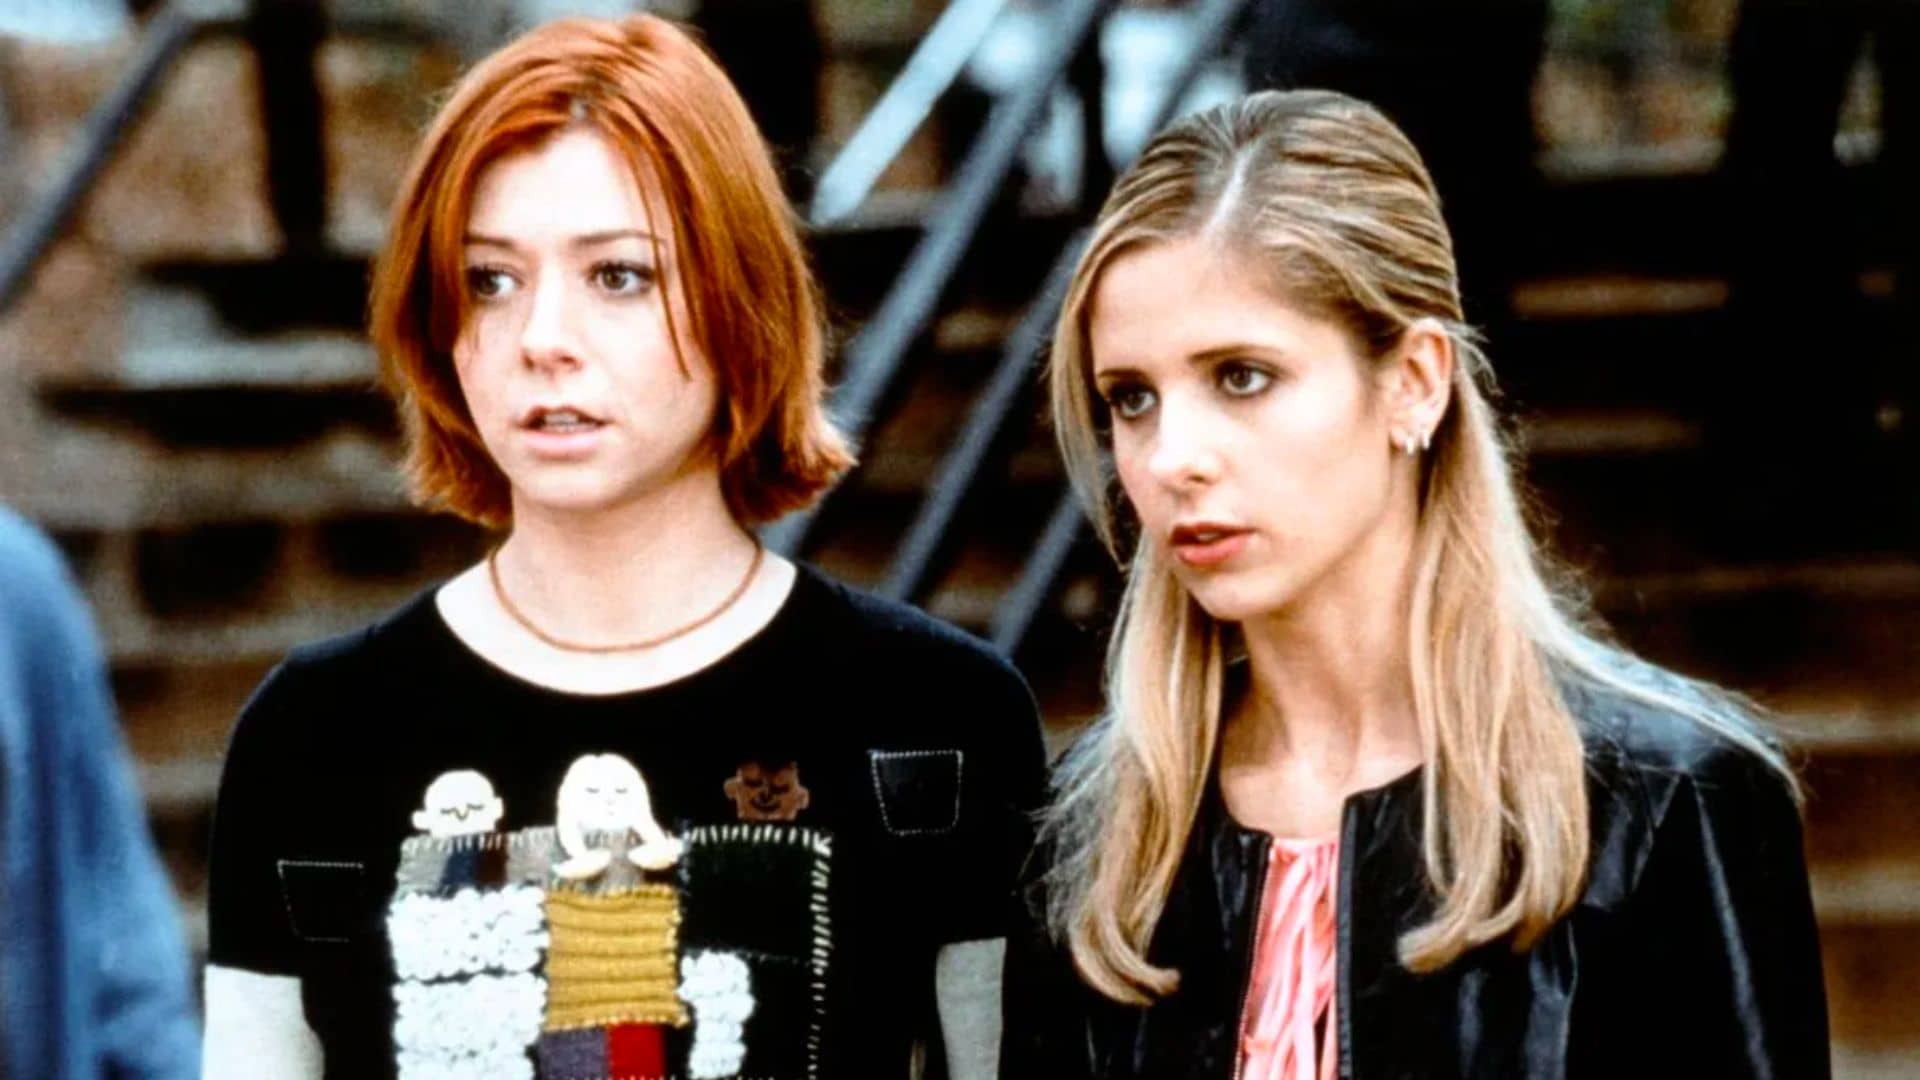 Willow and Buffy look intensely while standing in front of a flight of stairs in this image from Hulu.